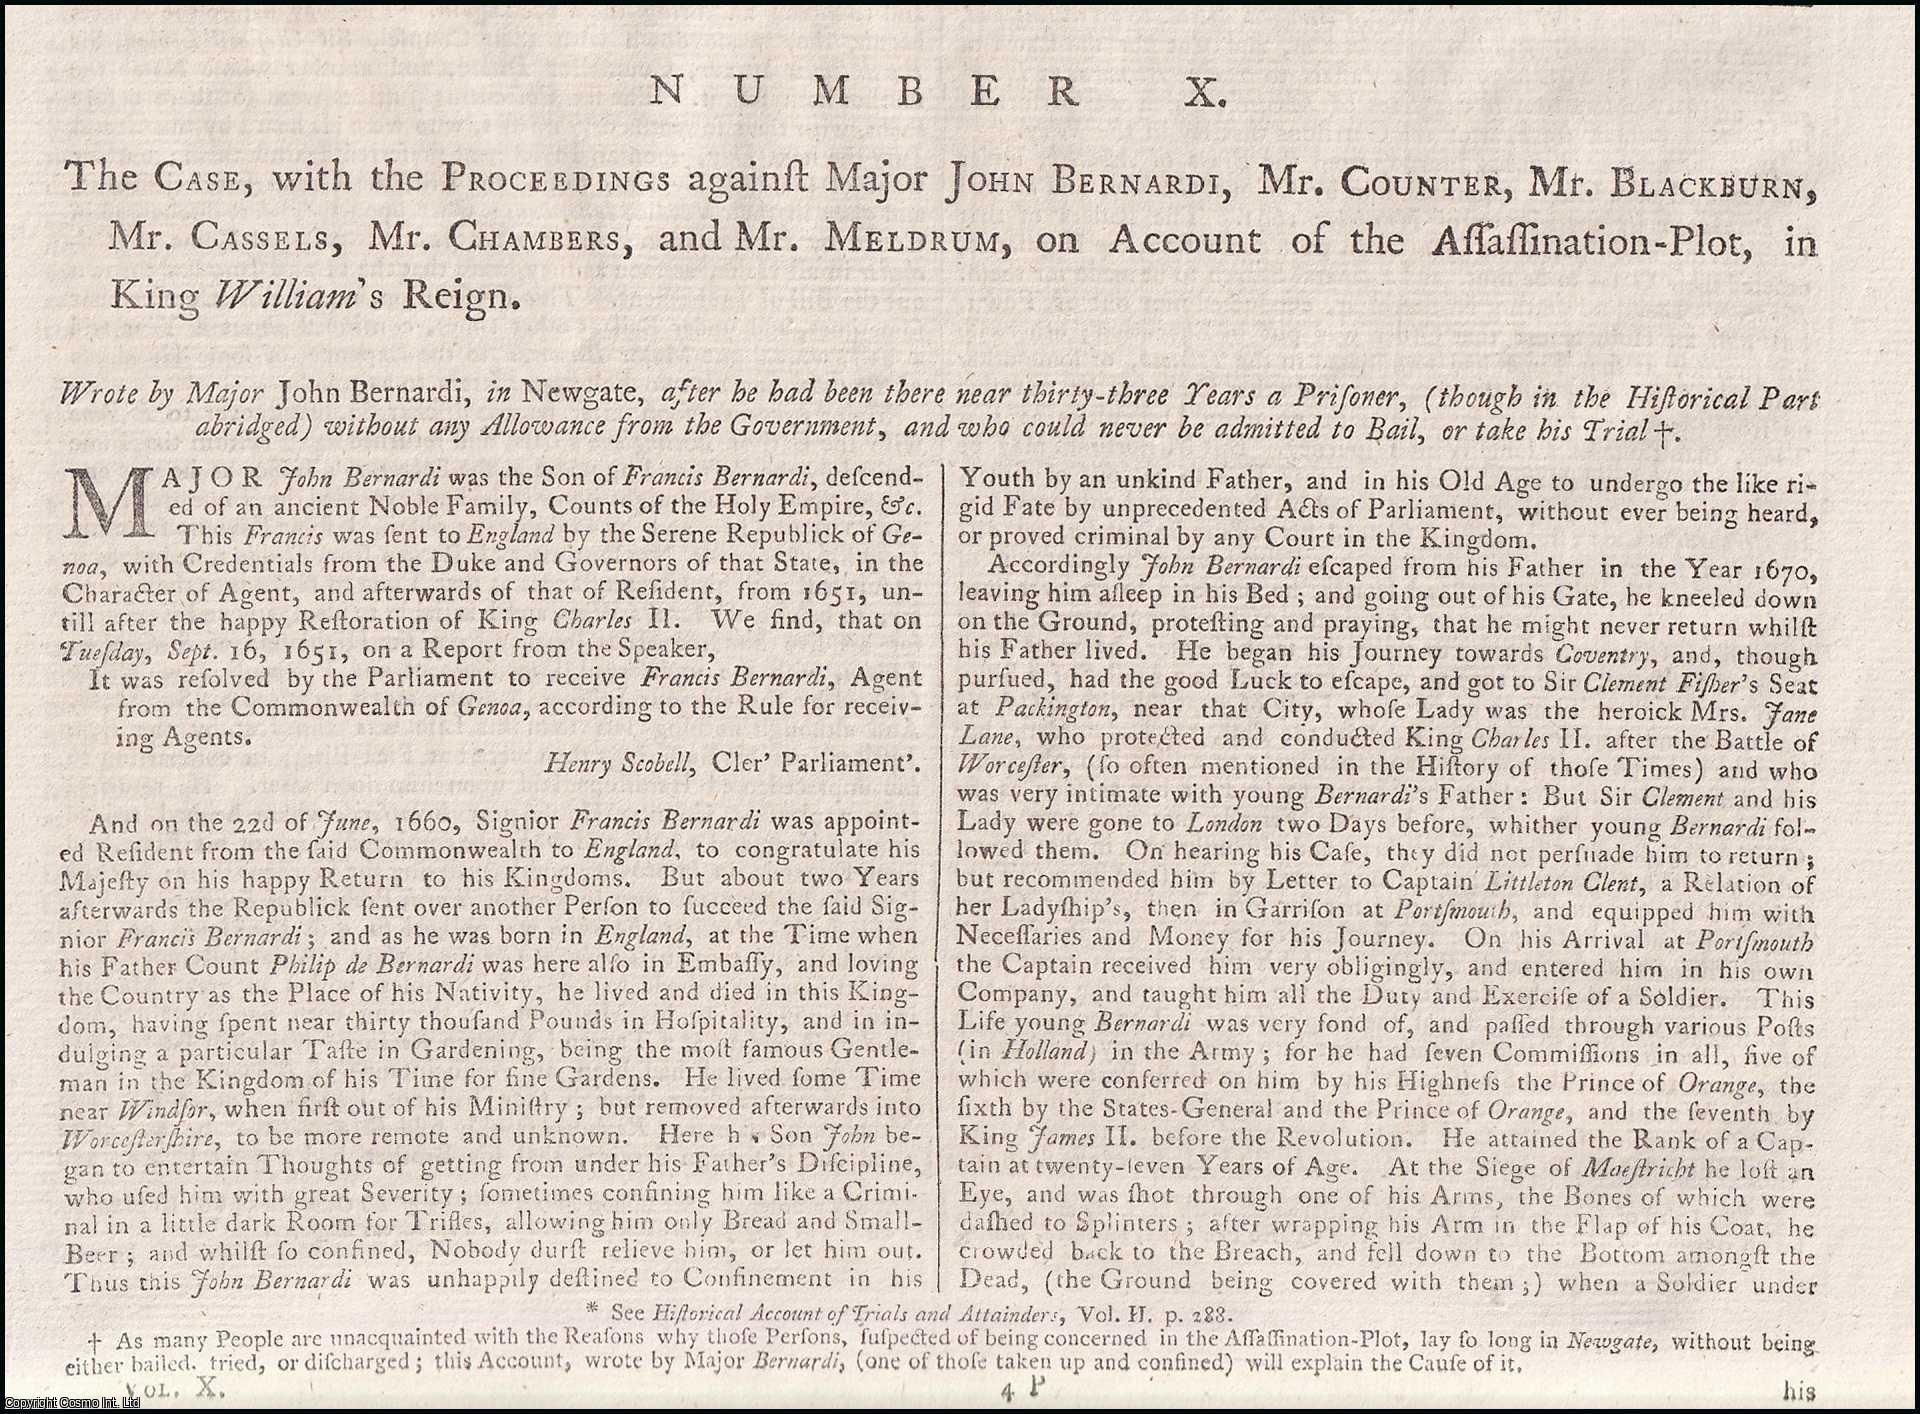 [Trial]. - The Case, with the Proceedings against Major John Bernardi, Mr. Counter, Mr. Blackburn, Mr. Cassels, Mr. Chambers, and Mr. Meldrum, on Account of the Assassination-Plot, in King William's Reign. An original report from the Collected State Trials.